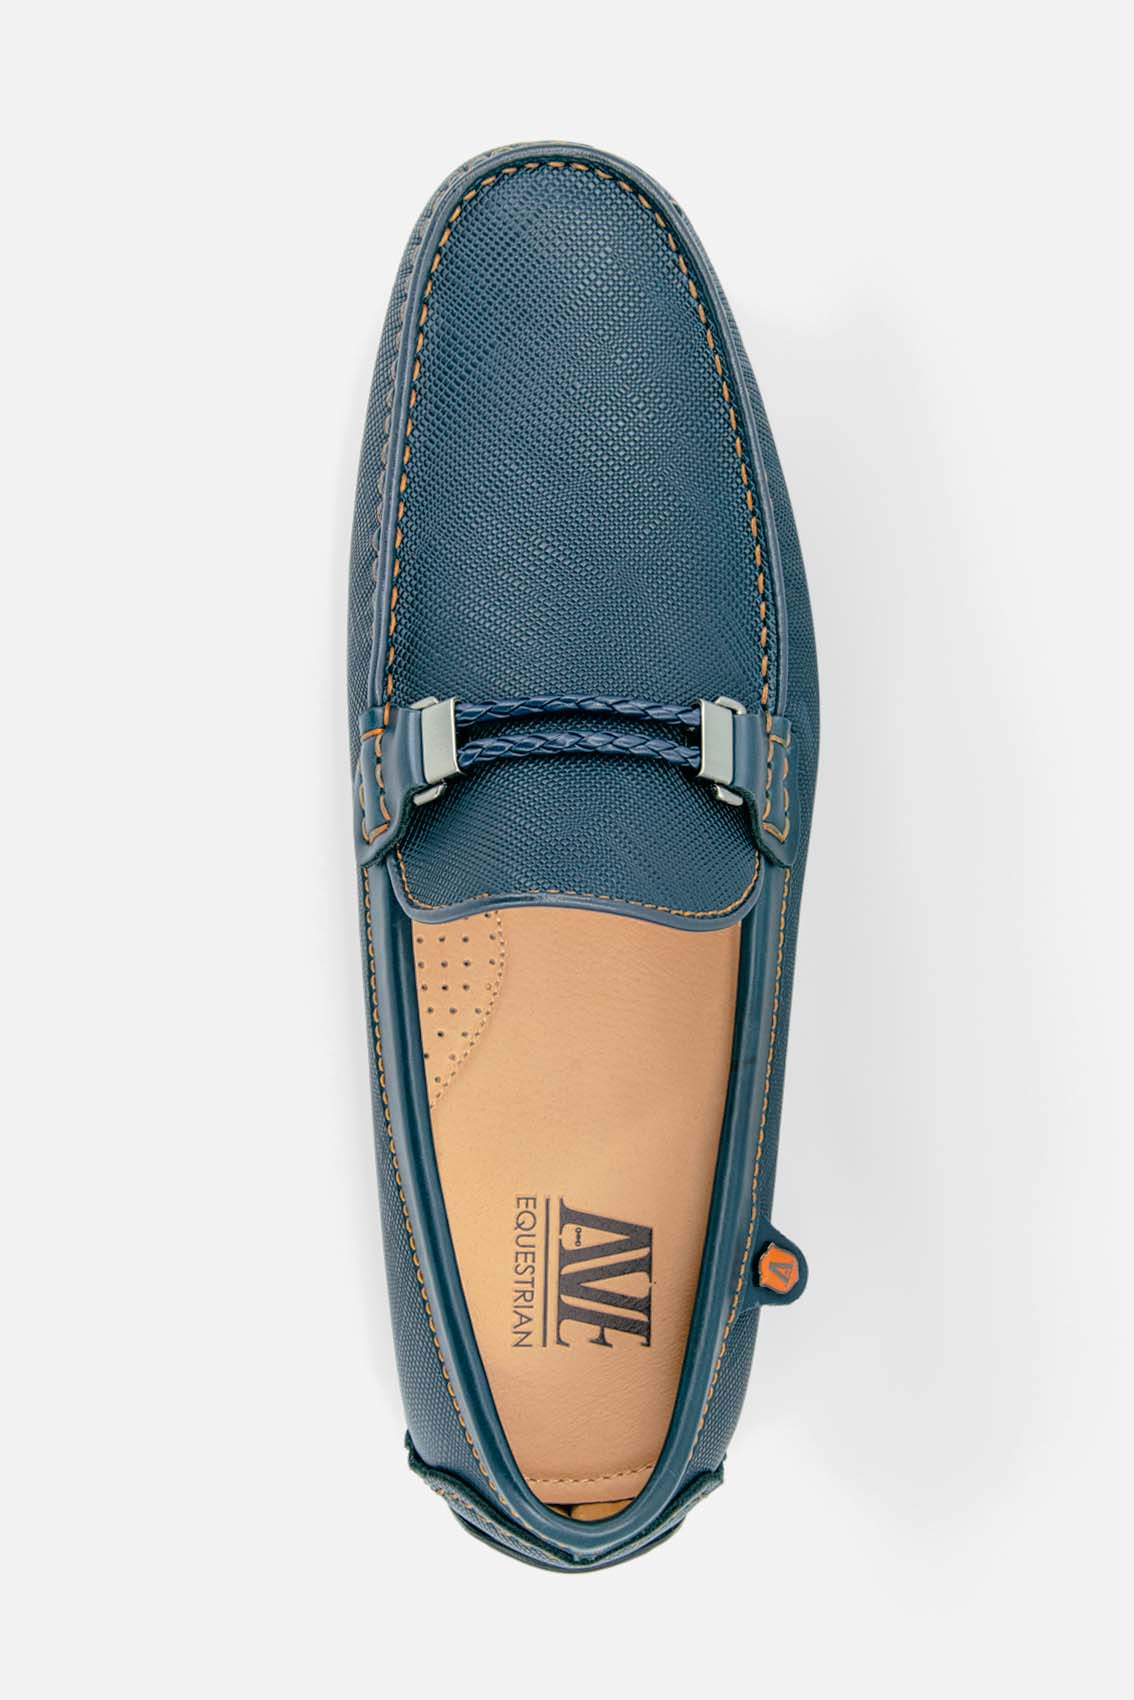 Men's moccasins made of leather with closed sole